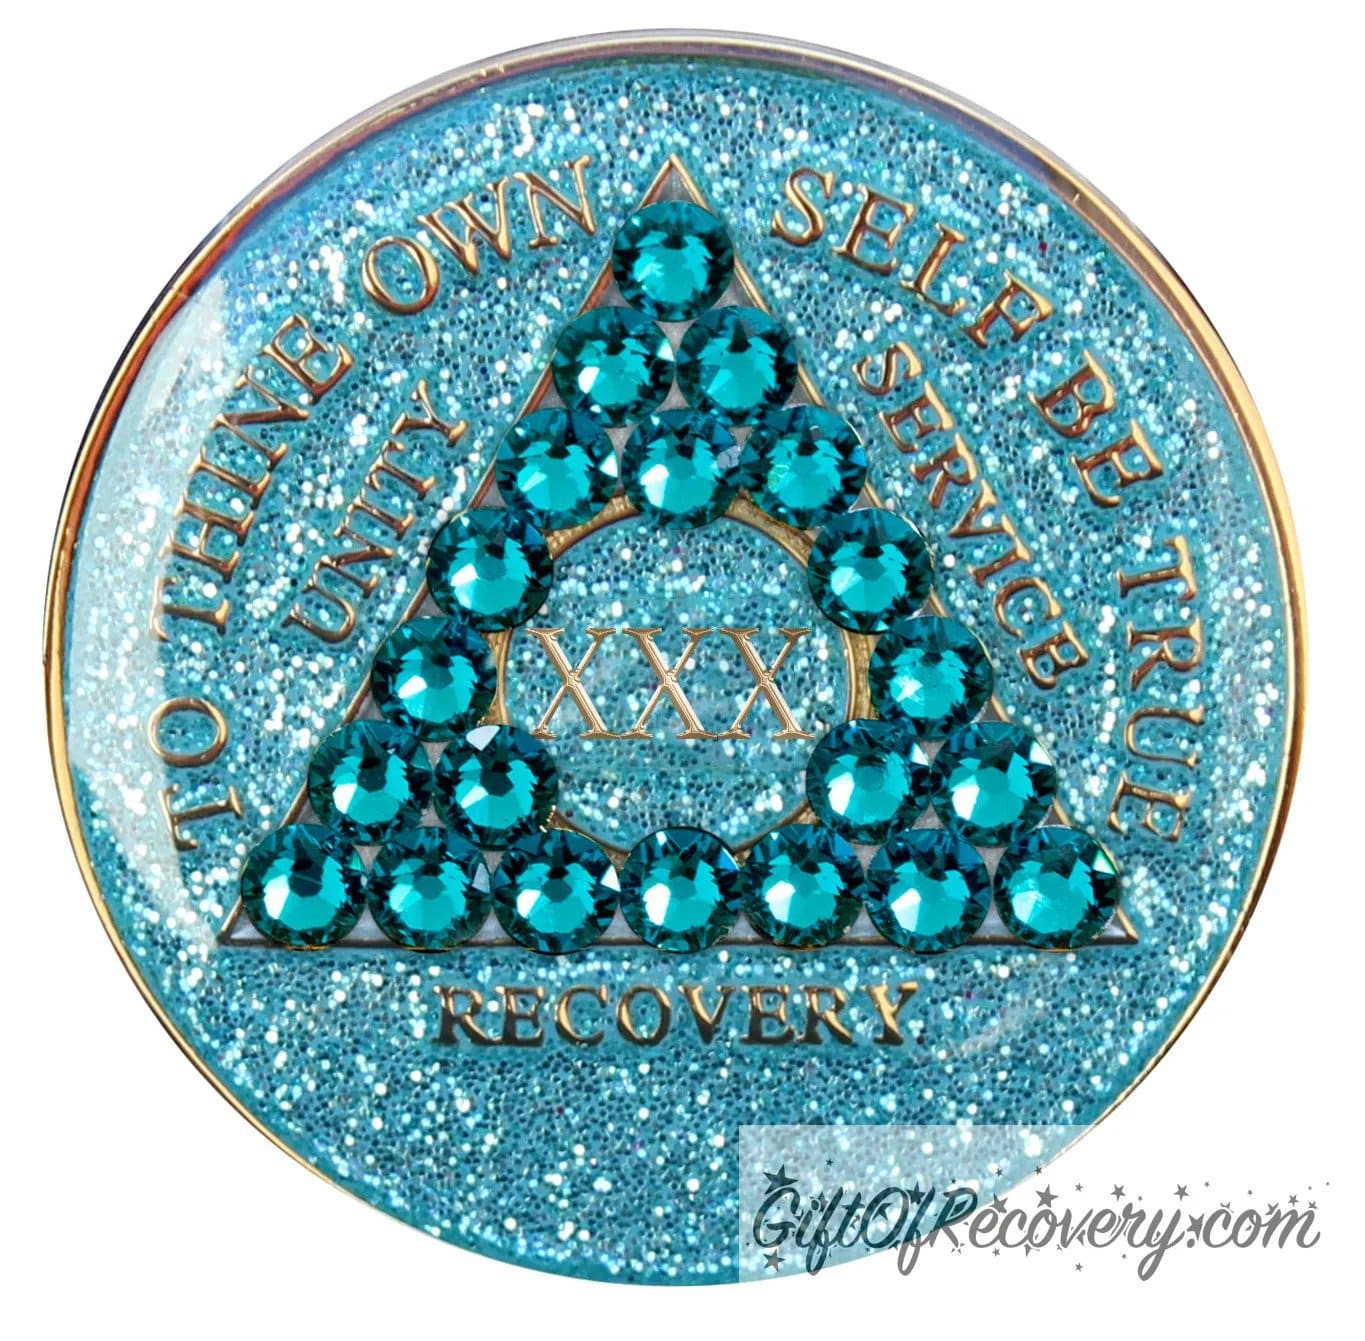 30 year AA medallion in aqua glitter with to thine own self be true, unity, service, recovery, the roman numeral in the center, and the outer rim of the medallion embossed in 14k gold plated brass, the center triangle has 21 genuine blue zircon crystal to give it a sparkle, it is sealed with resin for a shiny finish.